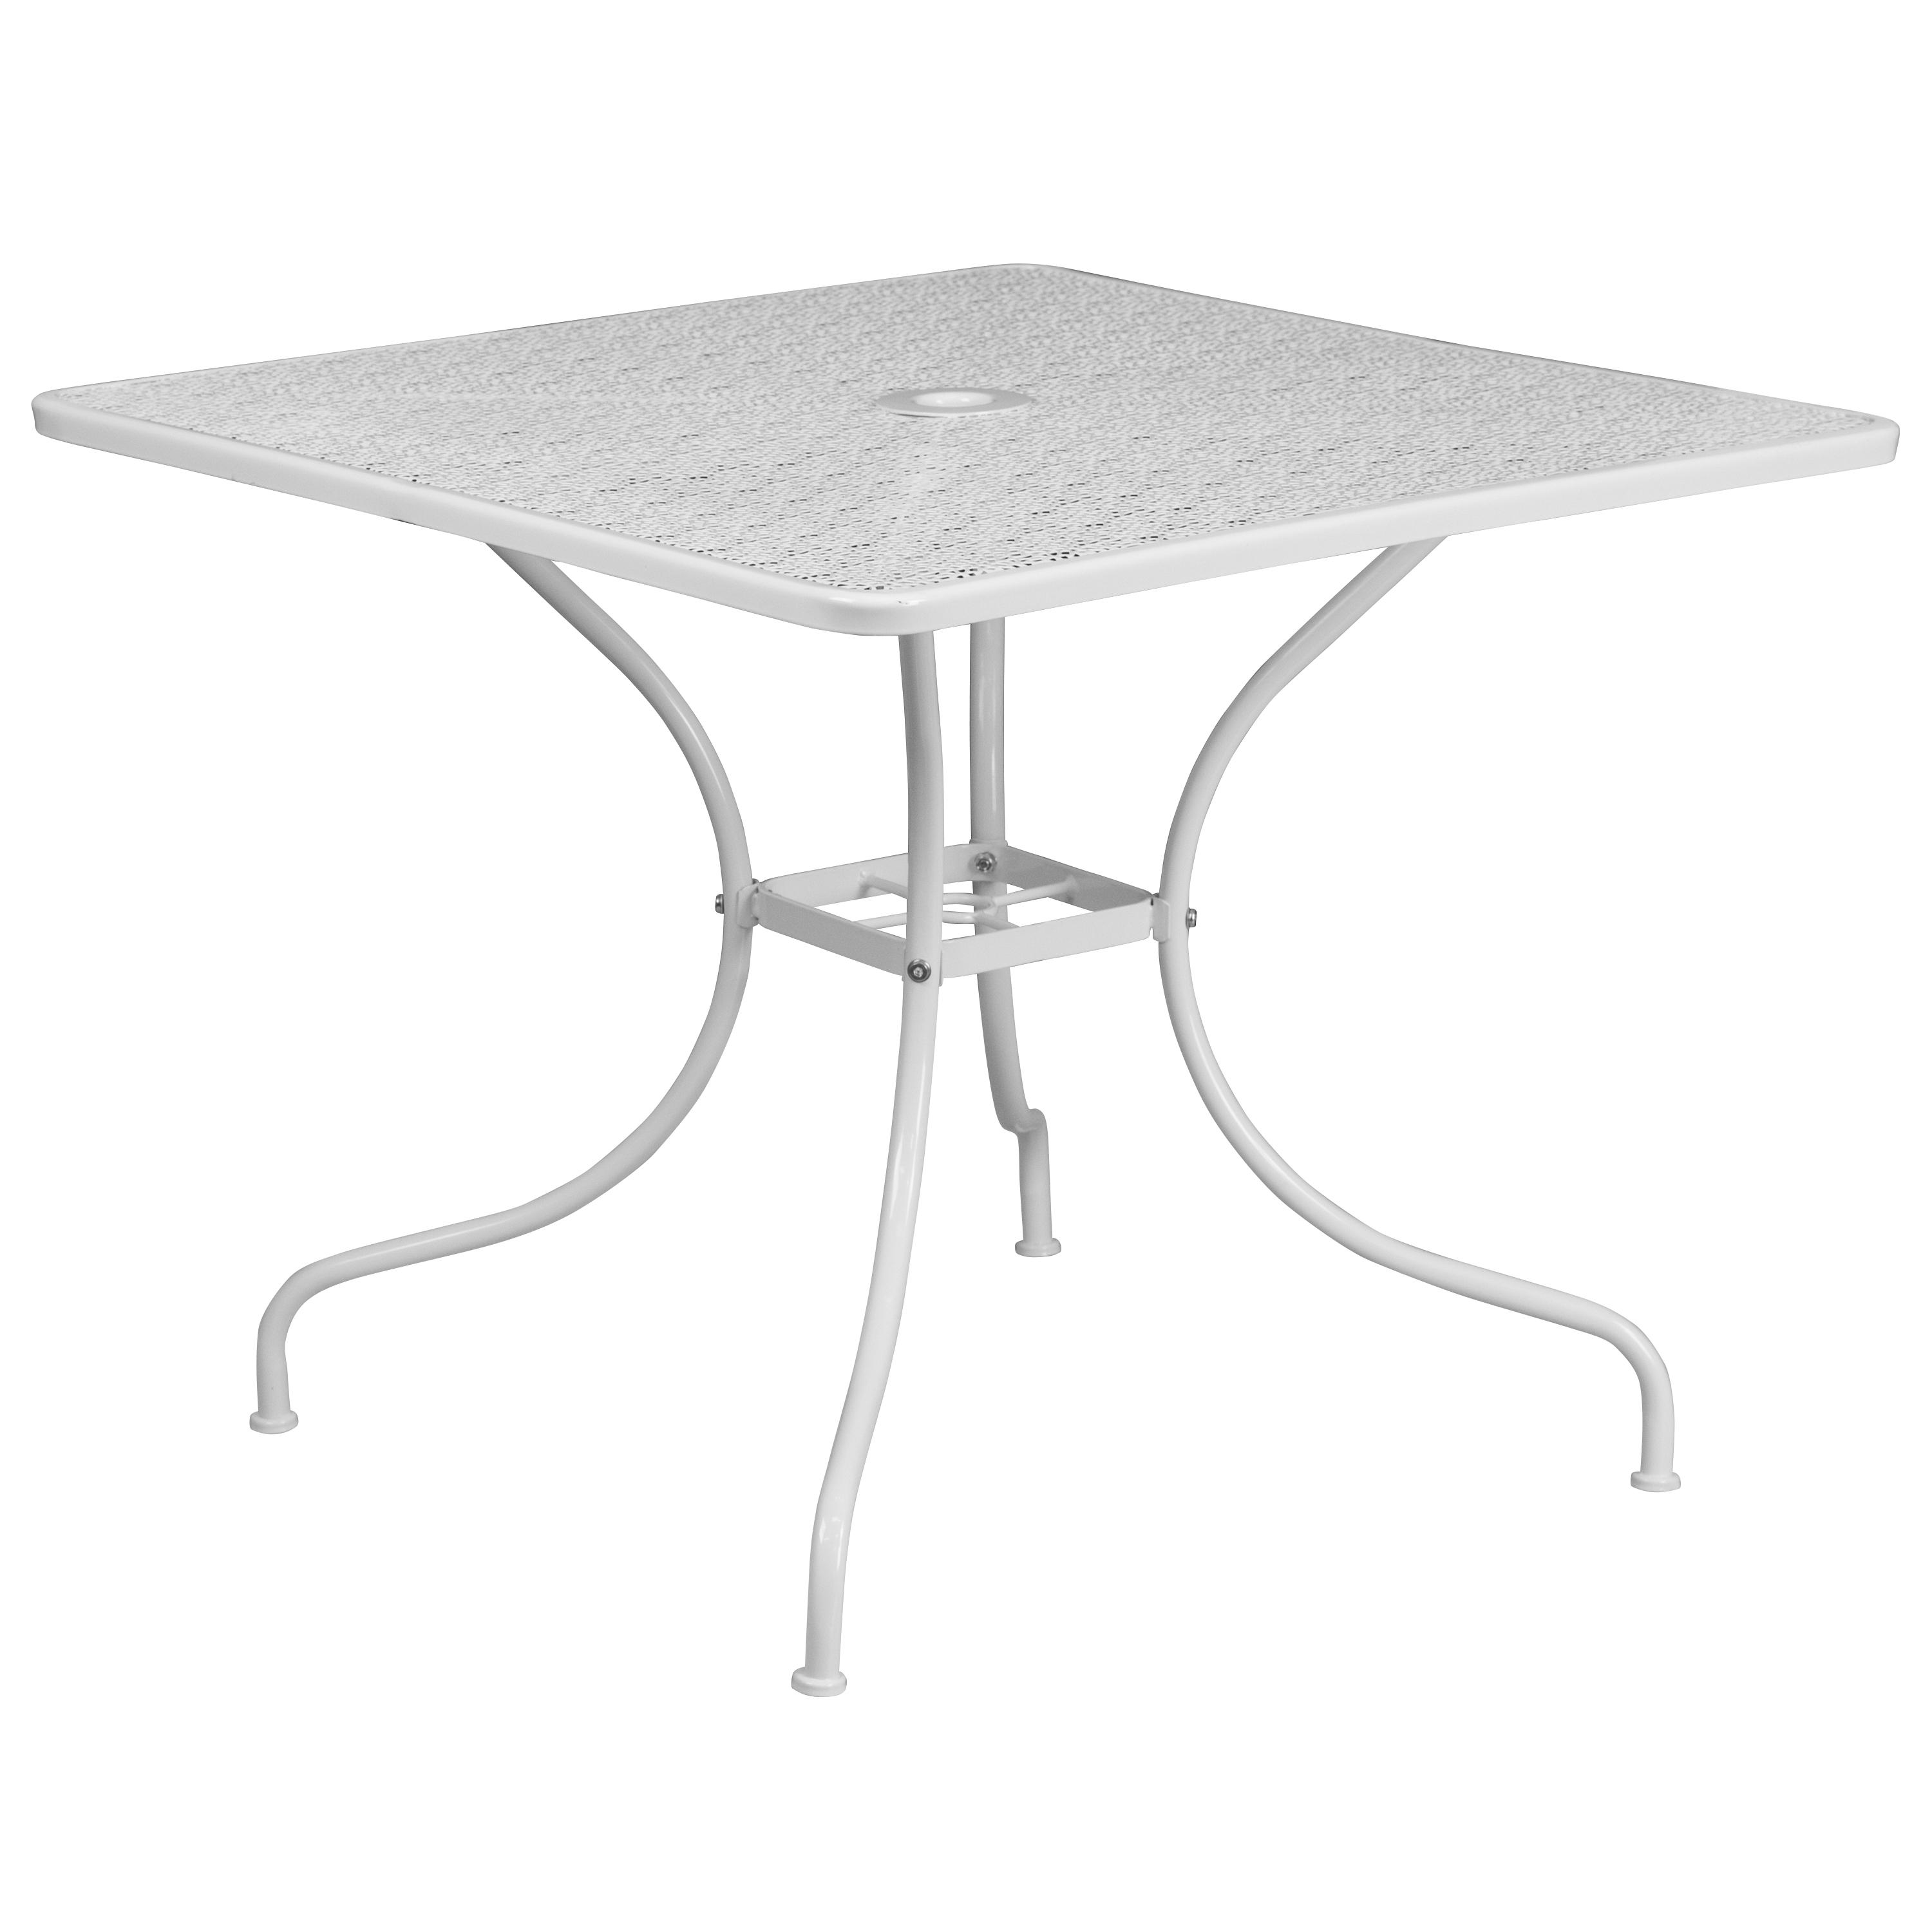 Flash Furniture Commercial Grade 35.5" Square White Indoor-Outdoor Steel Patio Table Set with 4 Round Back Chairs - image 4 of 5